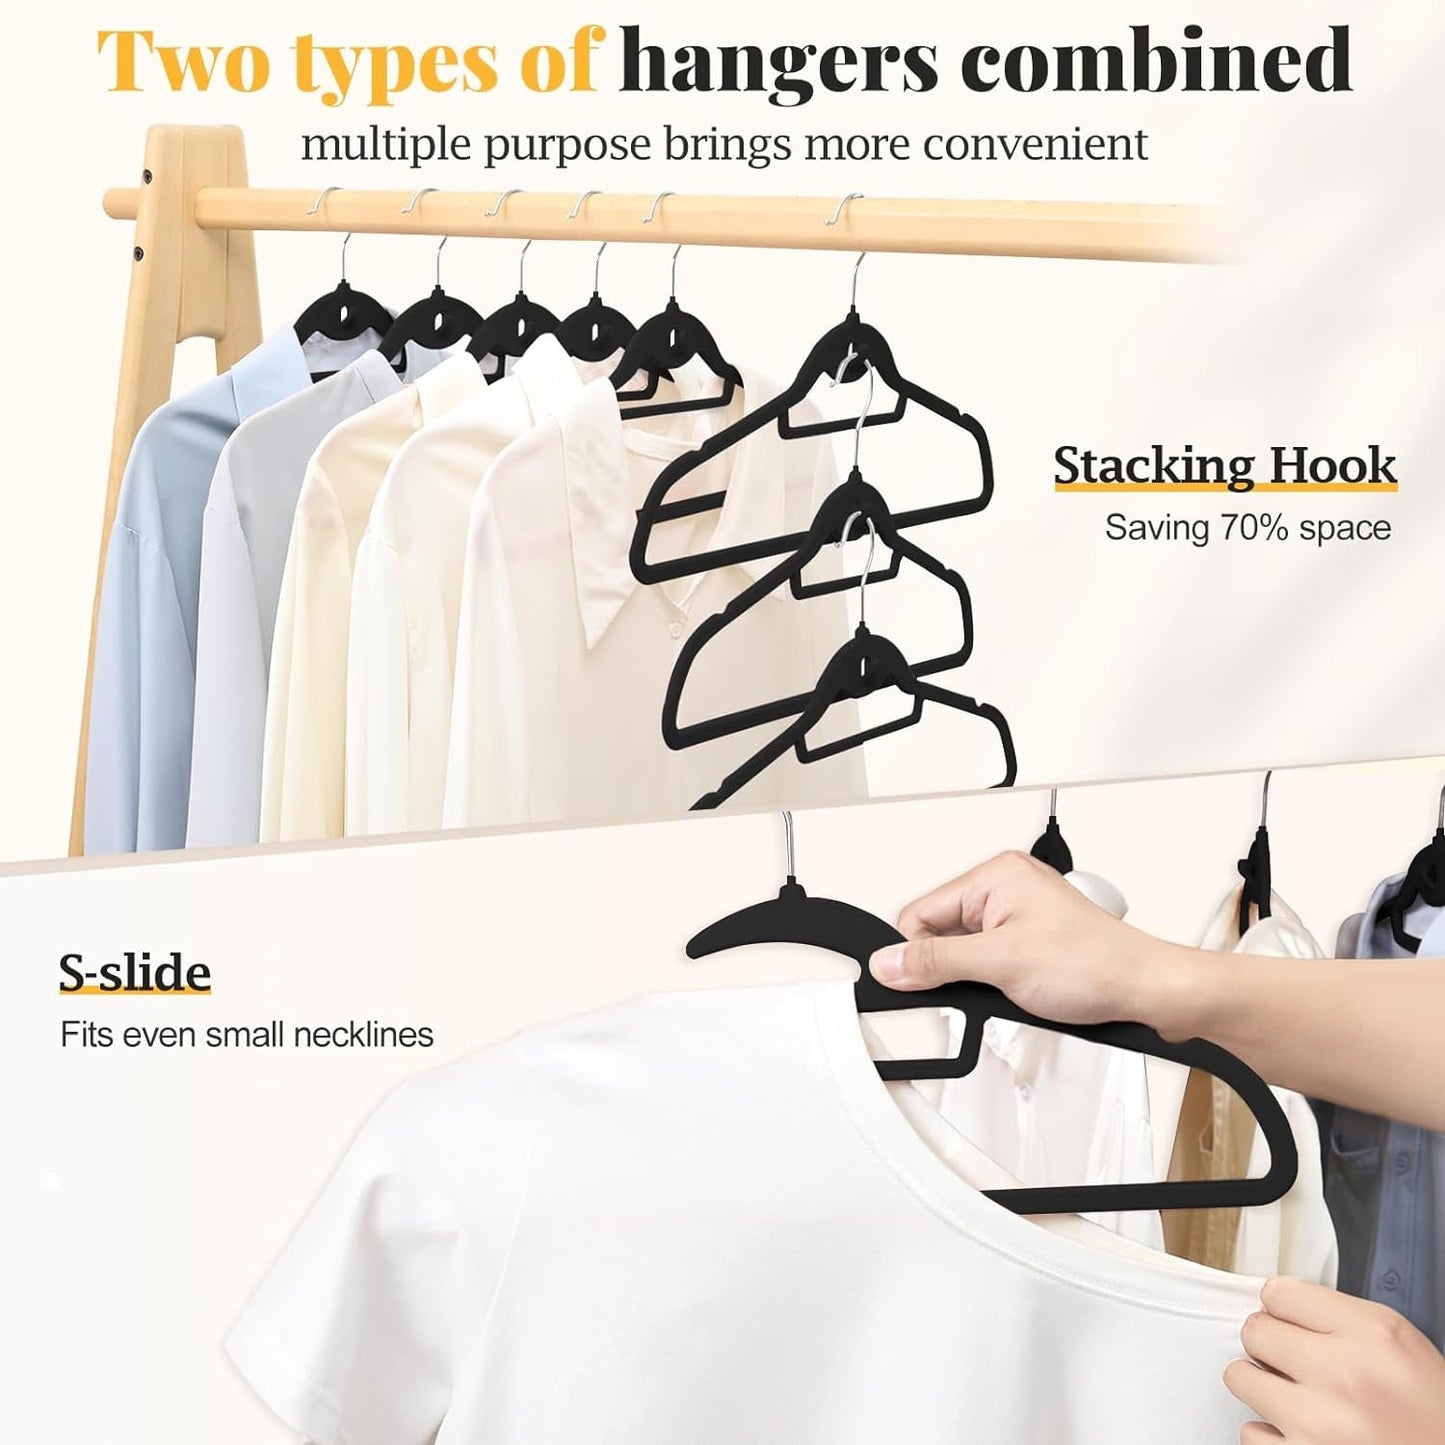 Black Velvet Hangers 50 Pack, S-Shaped and Stackable Non Slip Felt Hanger with 360°Swivel Hook, Ultra Thin and Space Saving Flocked Hangers for Suits, Shirts, Coats, 15Lbs Capacity Heavy Duty